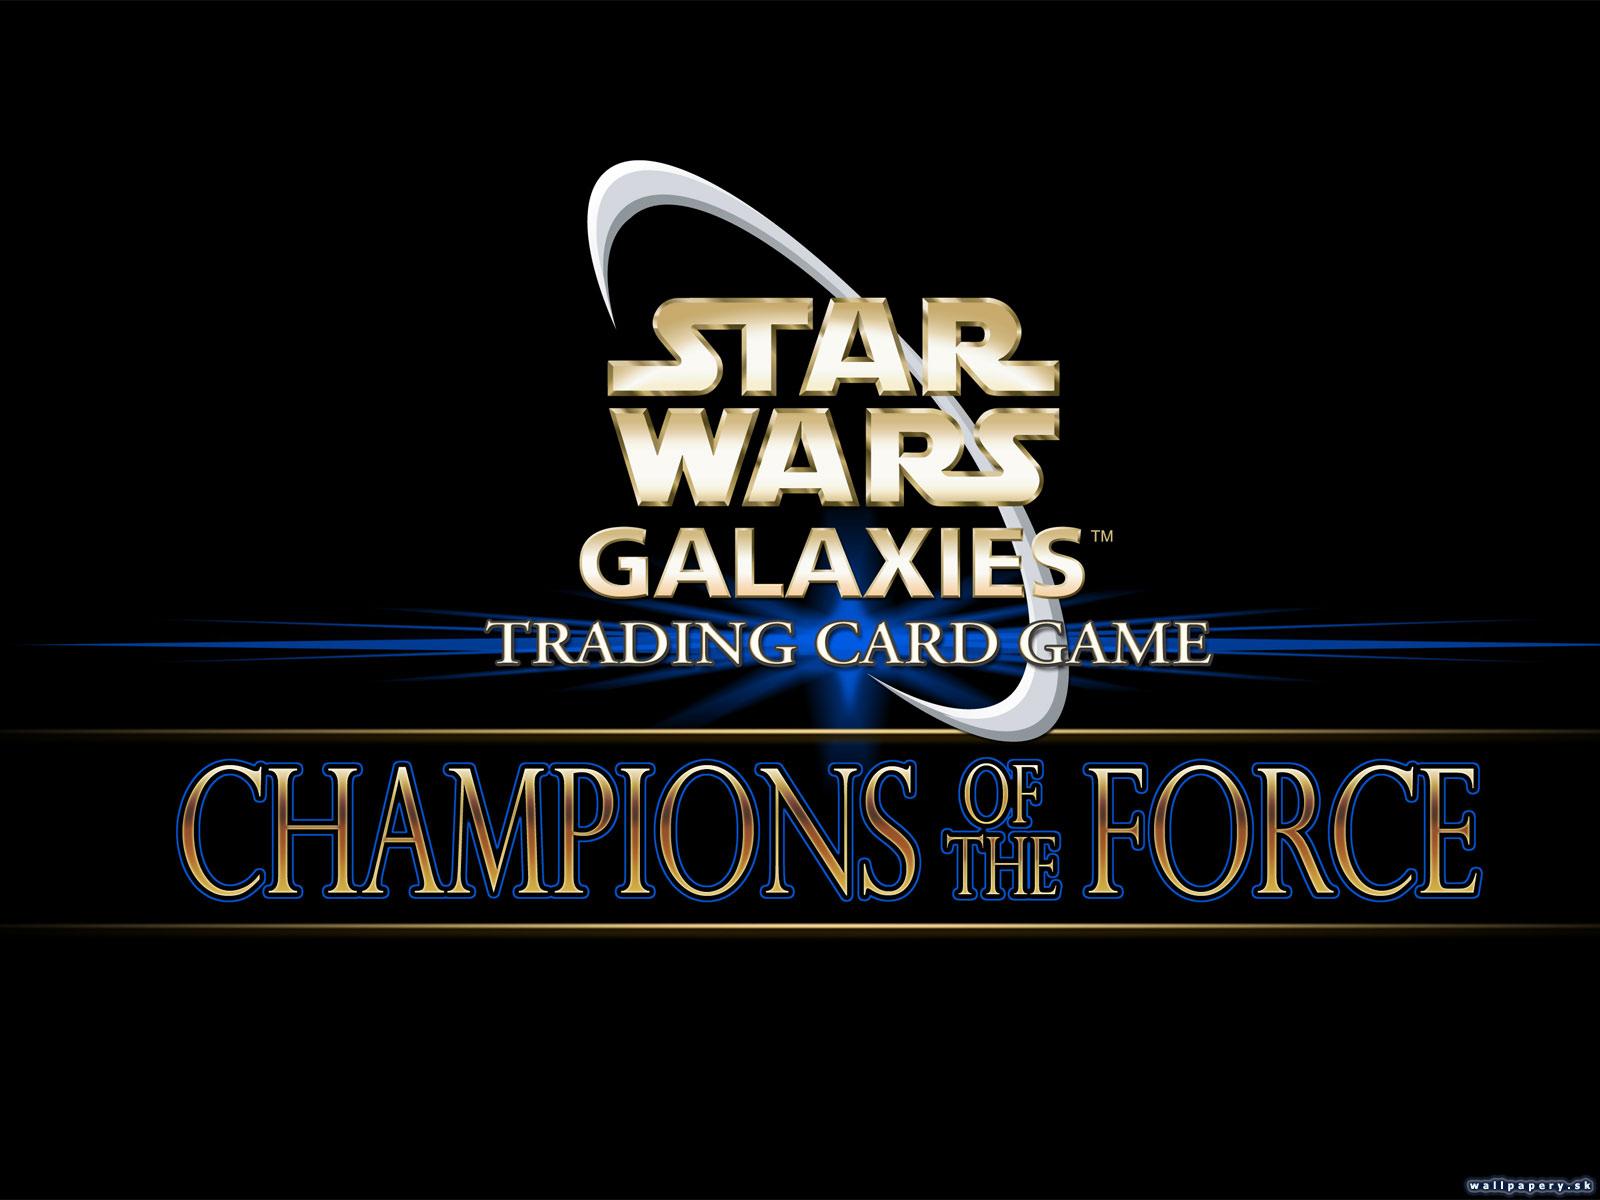 Star Wars Galaxies - Trading Card Game: Champions of the Force - wallpaper 1